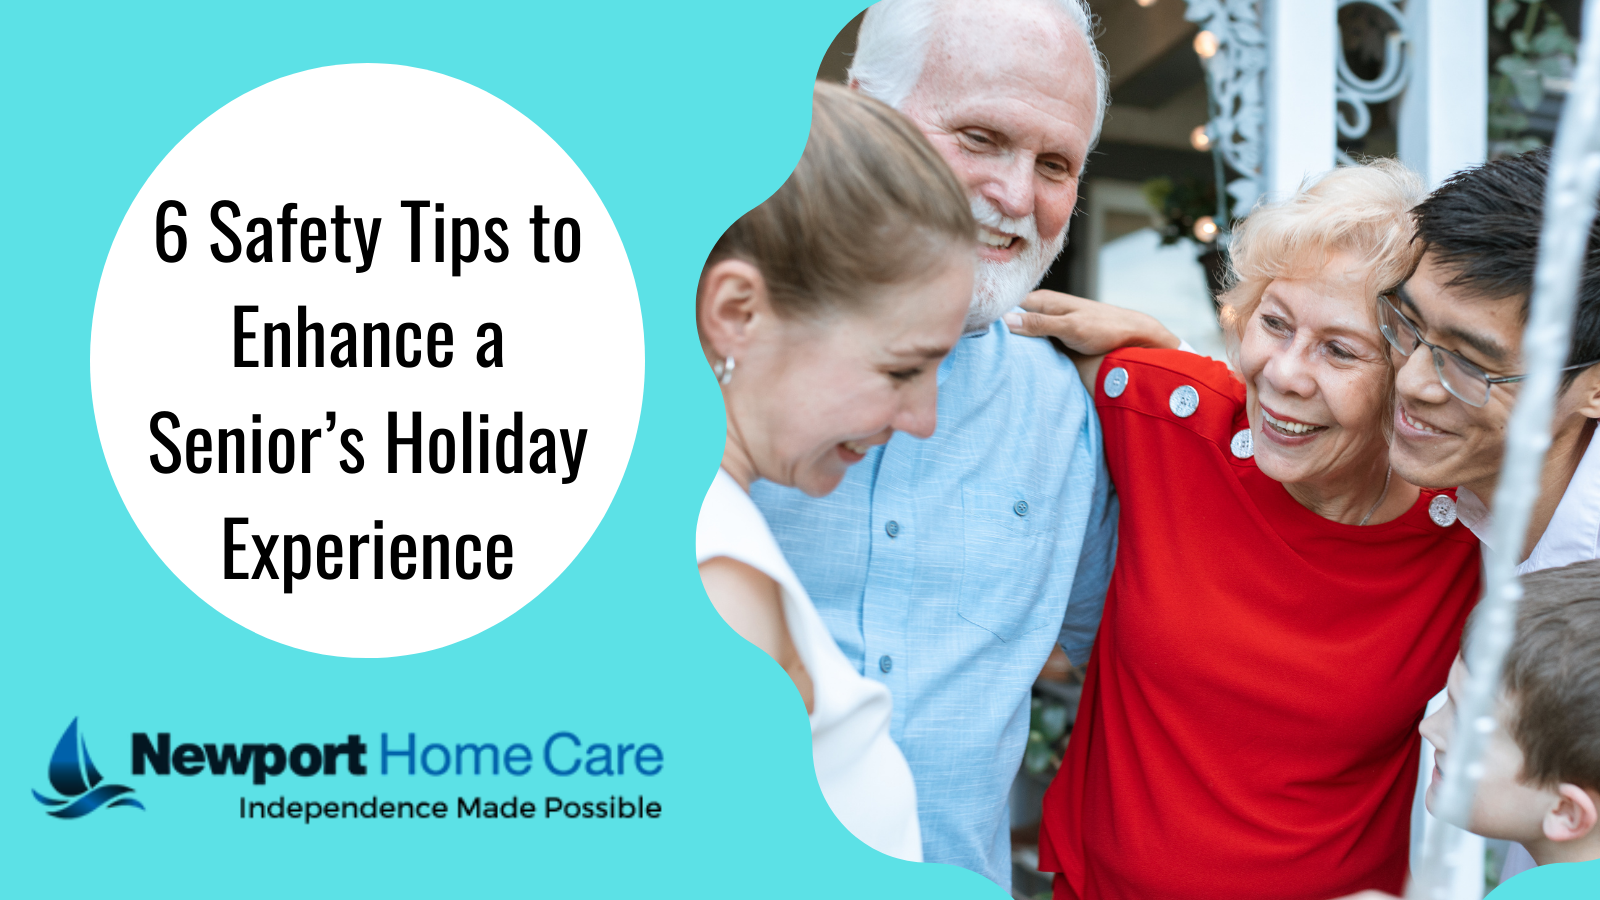 6 Safety Tips to Enhance a Senior’s Holiday Experience